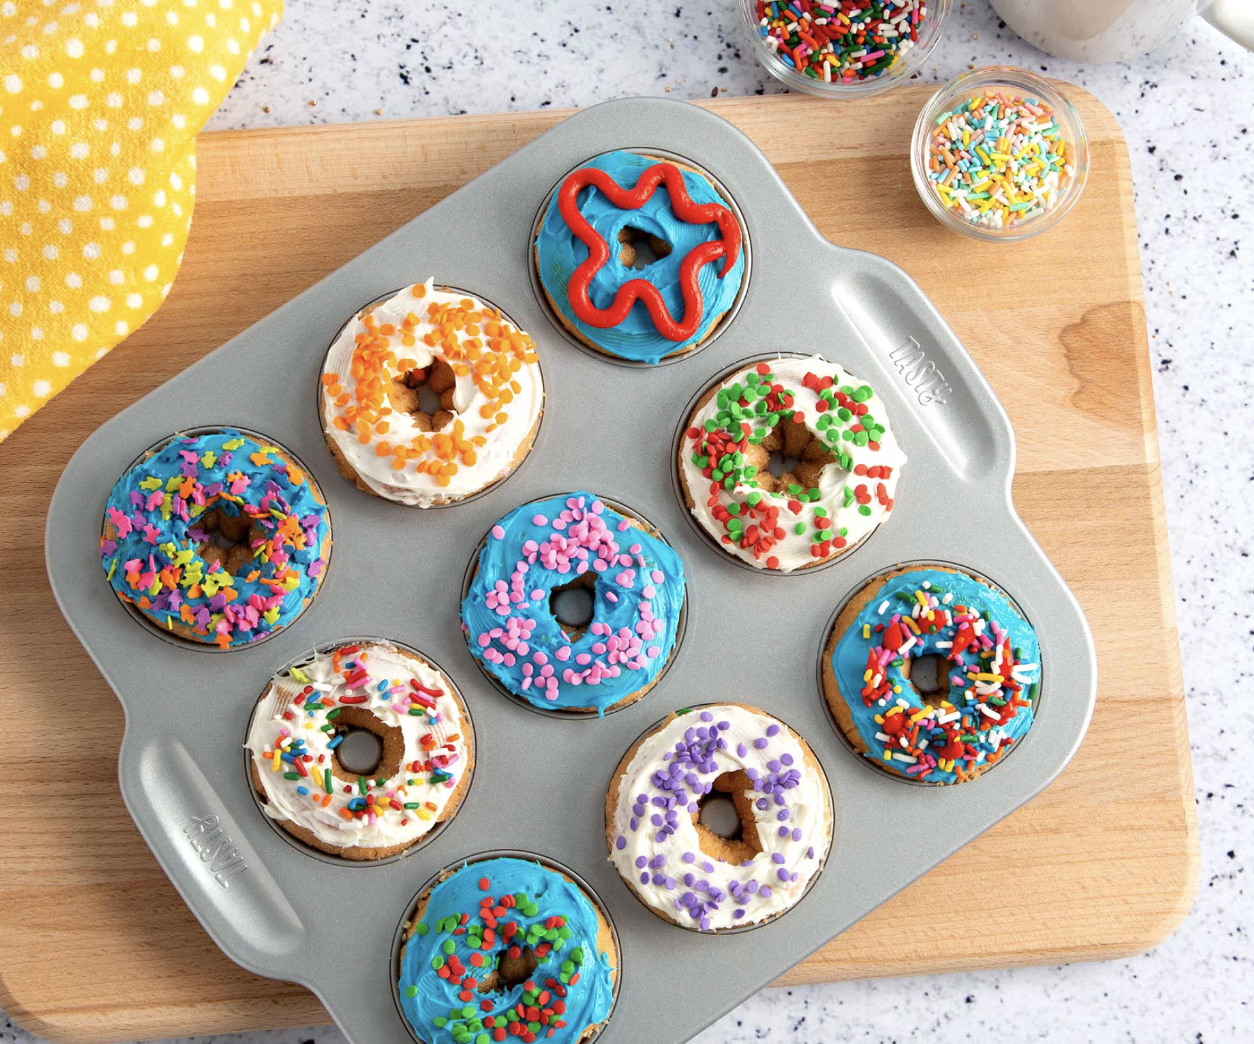 Tray of various decorated doughnuts with assorted sprinkles, displayed for choice or purchase